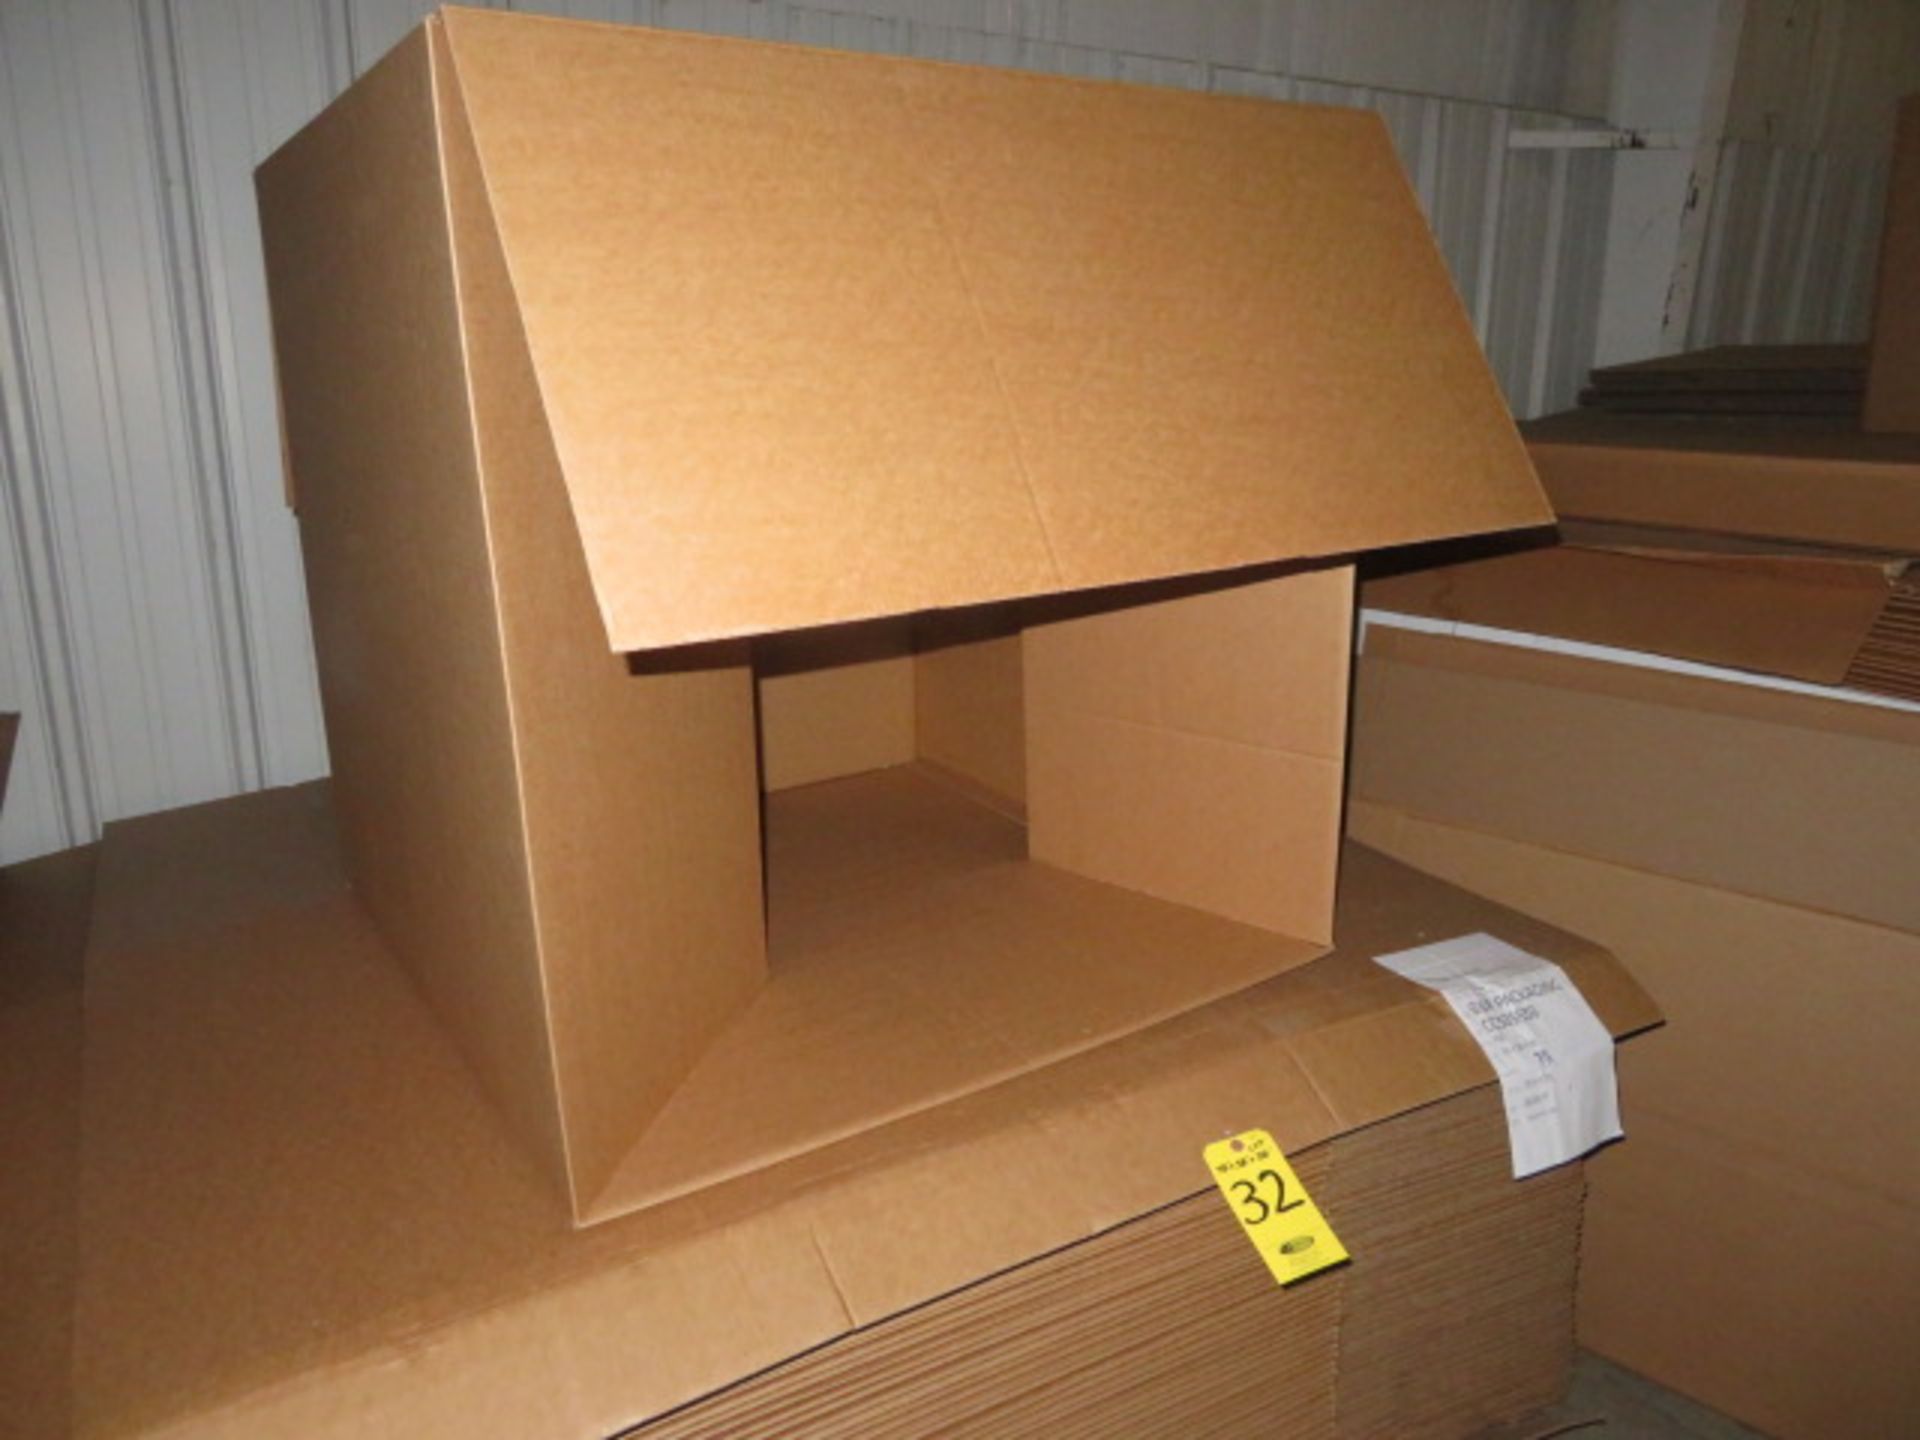 (50) 38 X 38 X 38 IN & (10) 36 X 31 X 8-1/2 IN K/D CORRUGATED BOXES - Image 3 of 3